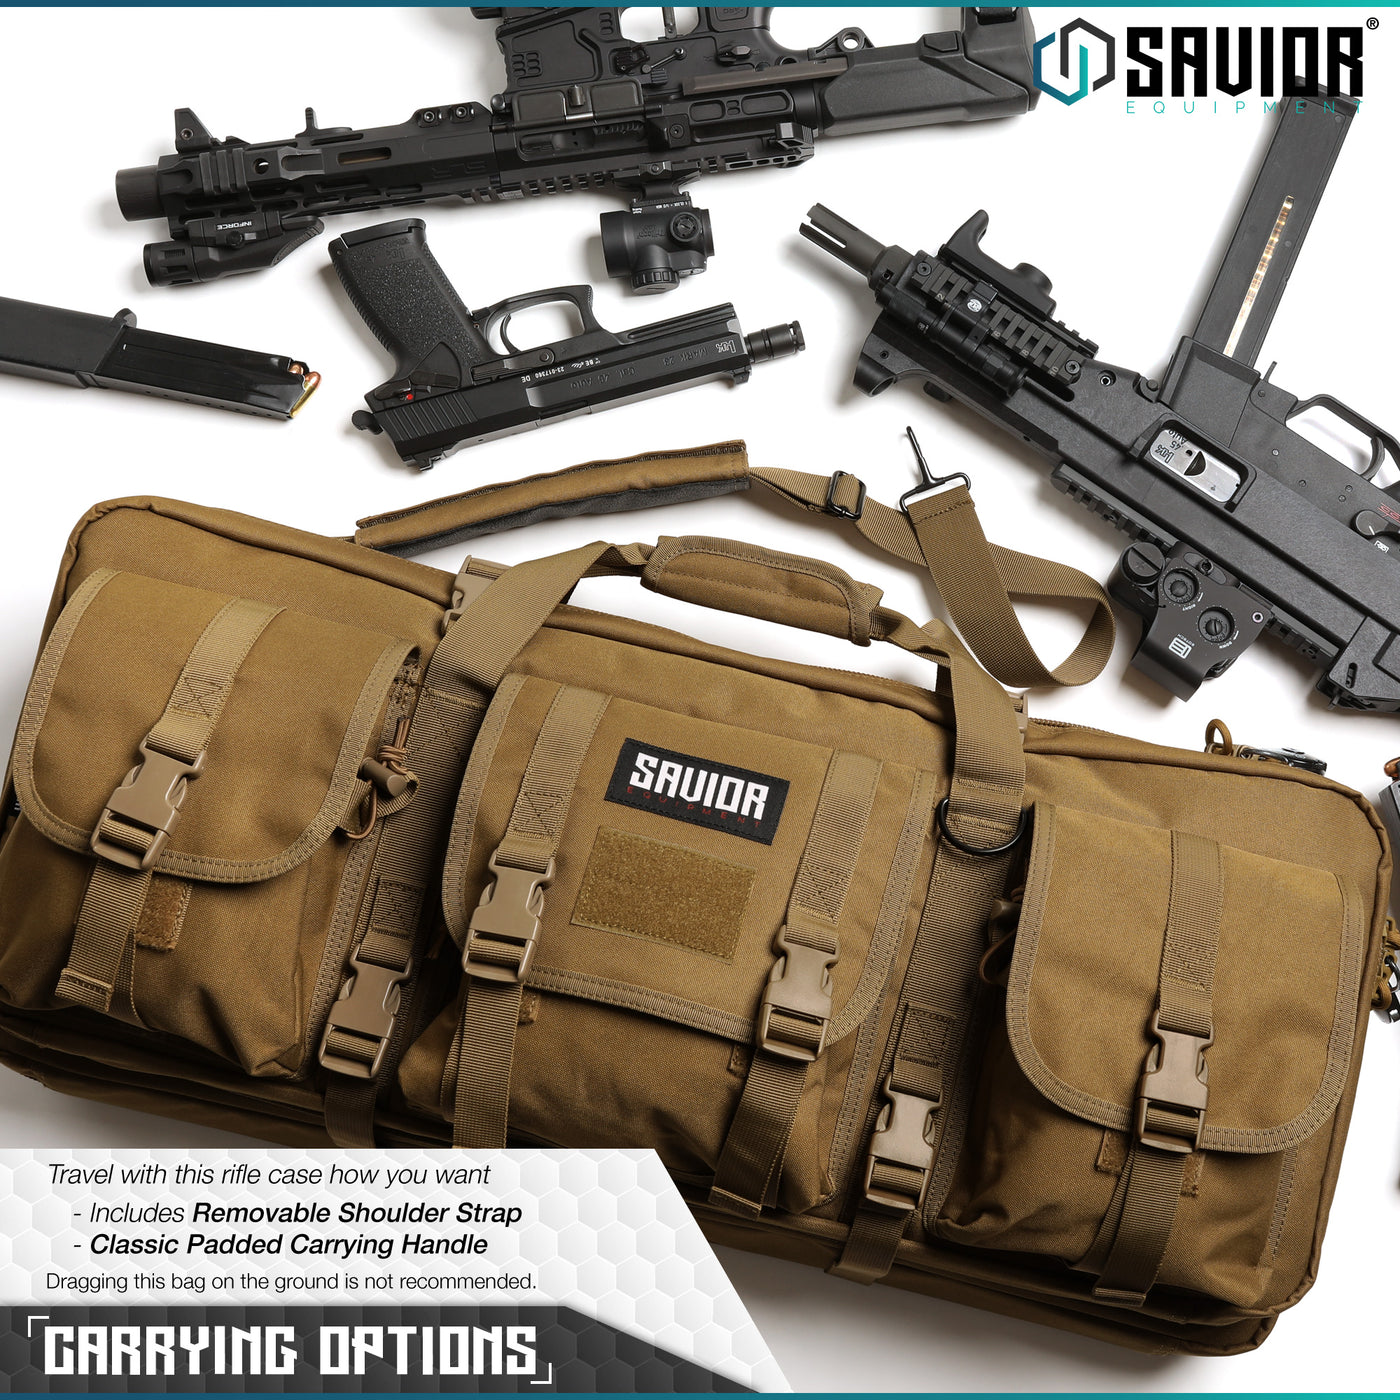 Carrying Options - Travel with this case however you want. Includes removable shoulder strap. Classic padded carrying handle. Dragging this bag on the groundis not recommended.